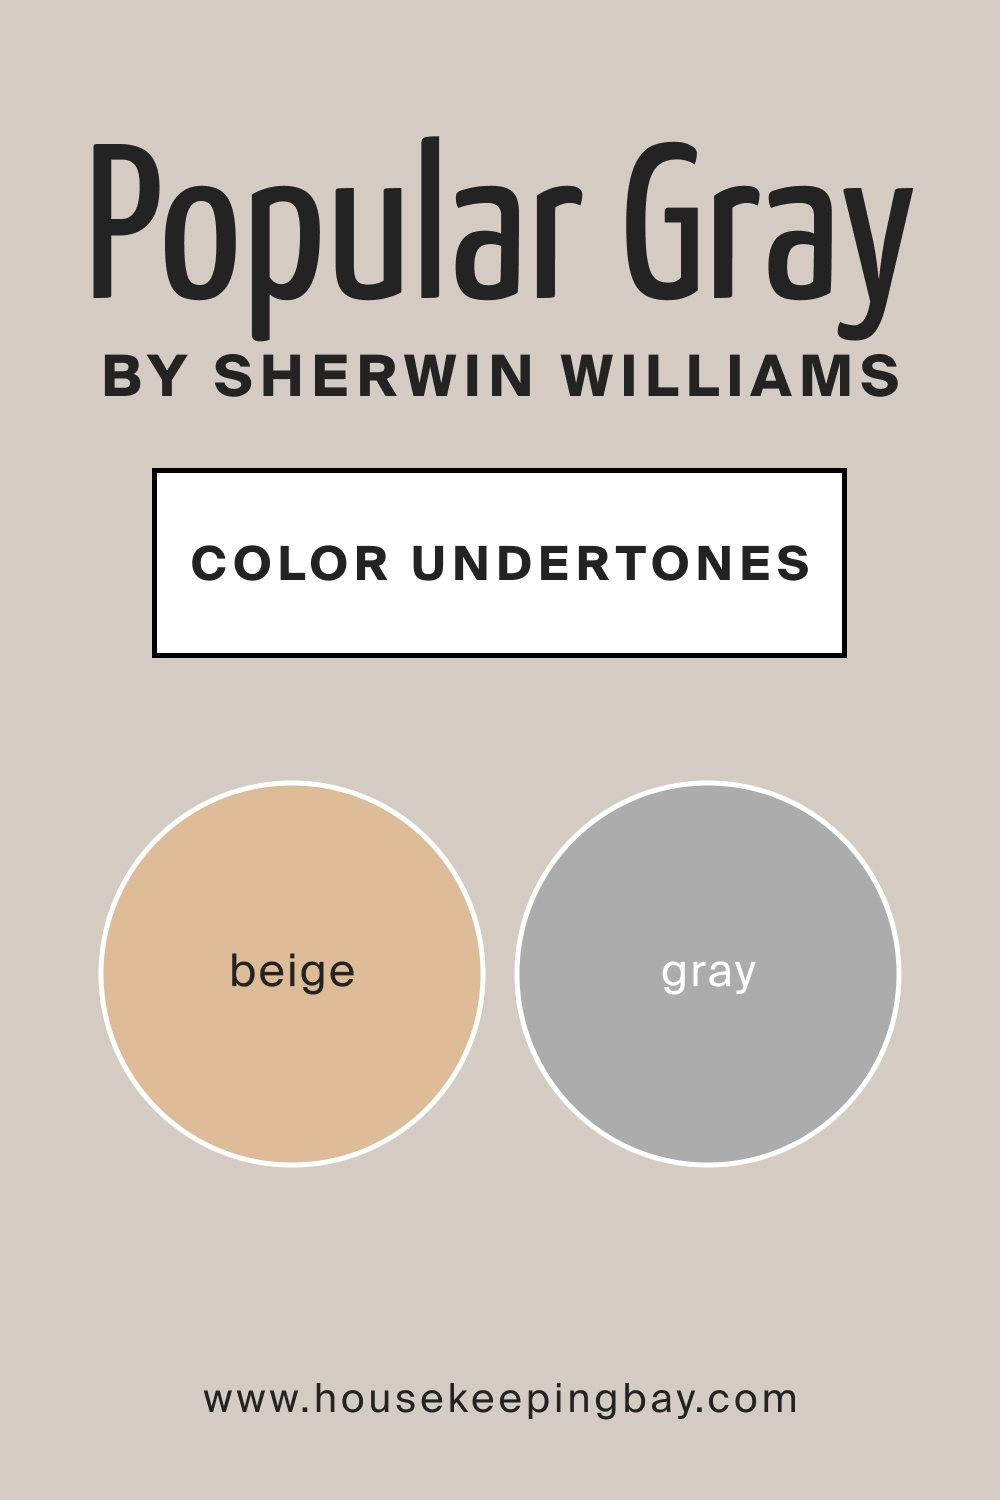 Popular Gray SW by Sherwin Williams Main Color Undertone